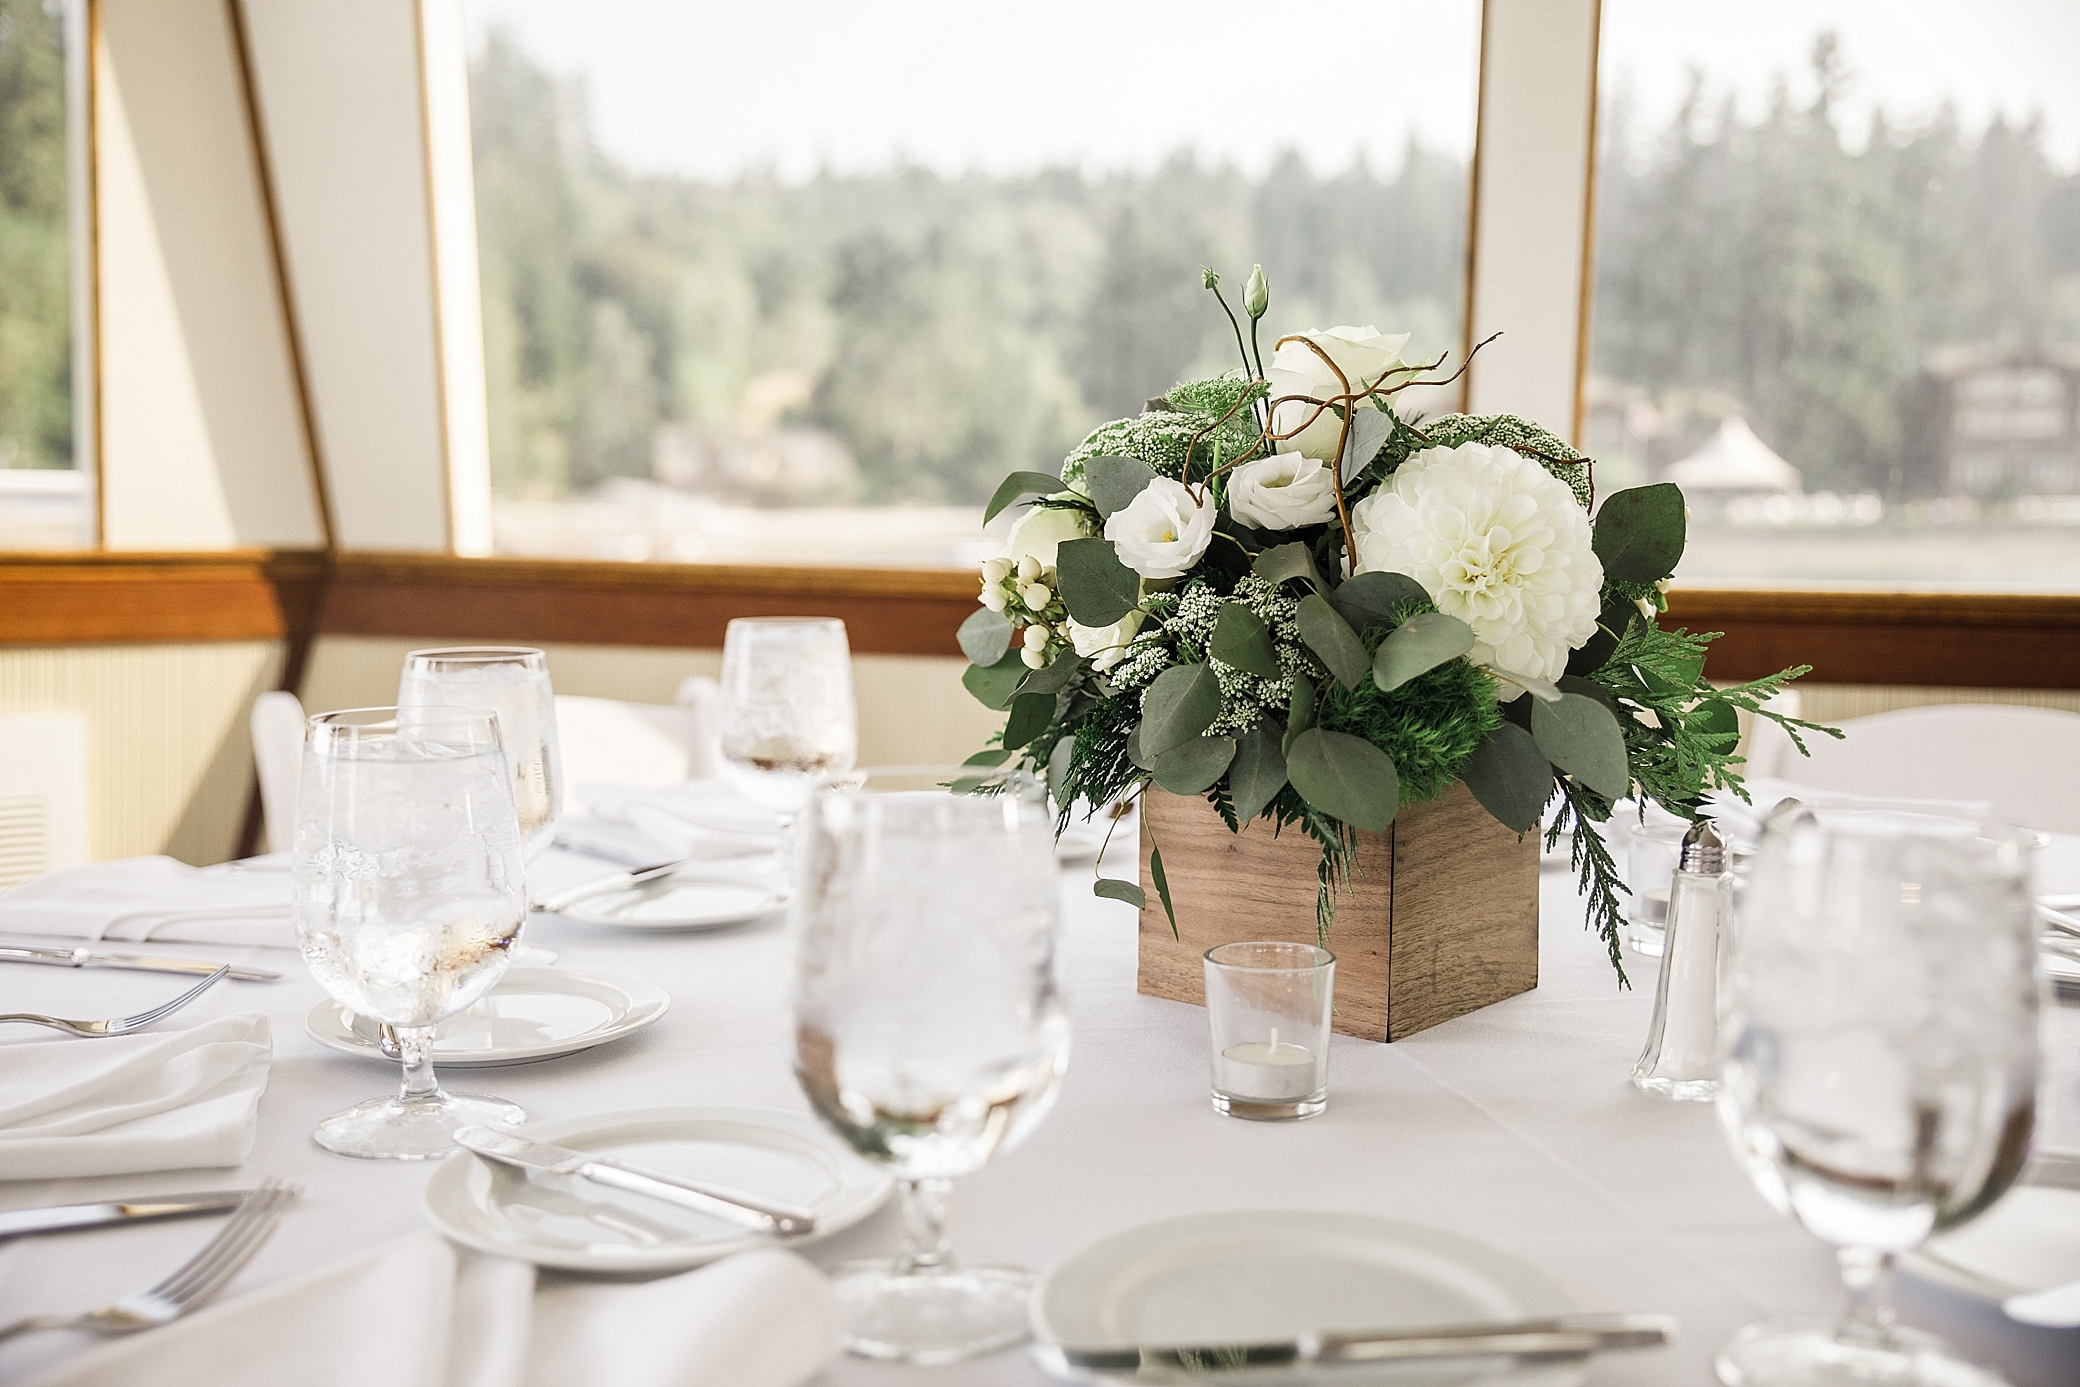 Wedding rehearsal dinner at Alderbrook Resort and Spa Lady Alderbrook. Photographed by Seattle Wedding Photographer, Megan Montalvo Photography. 